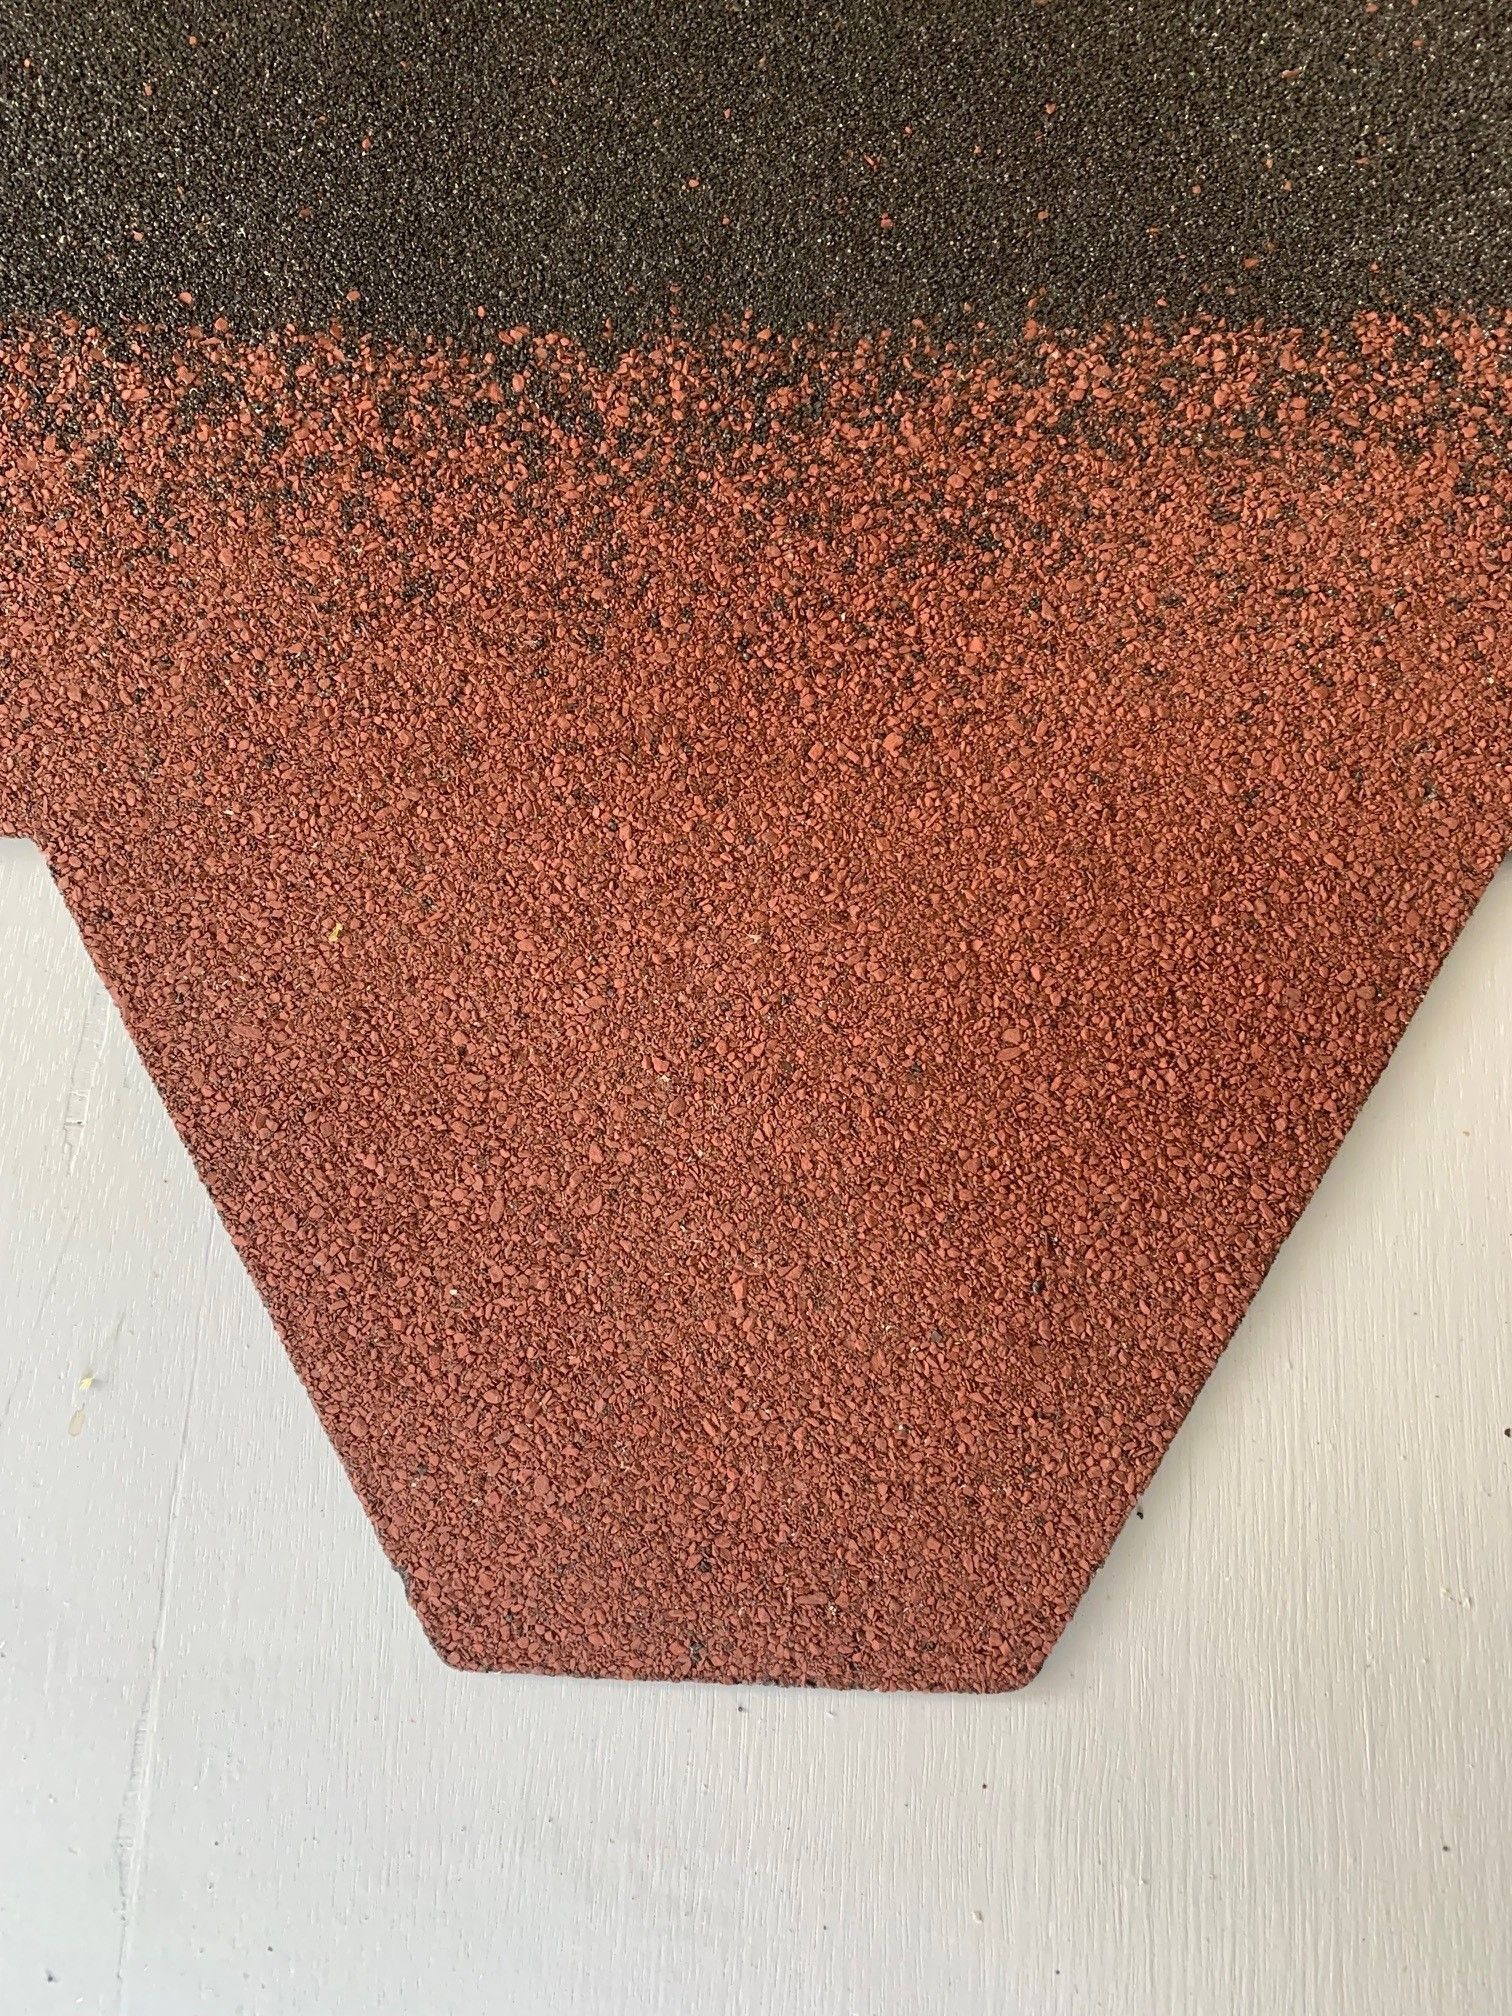 Red shingles that go on our roofs as an option